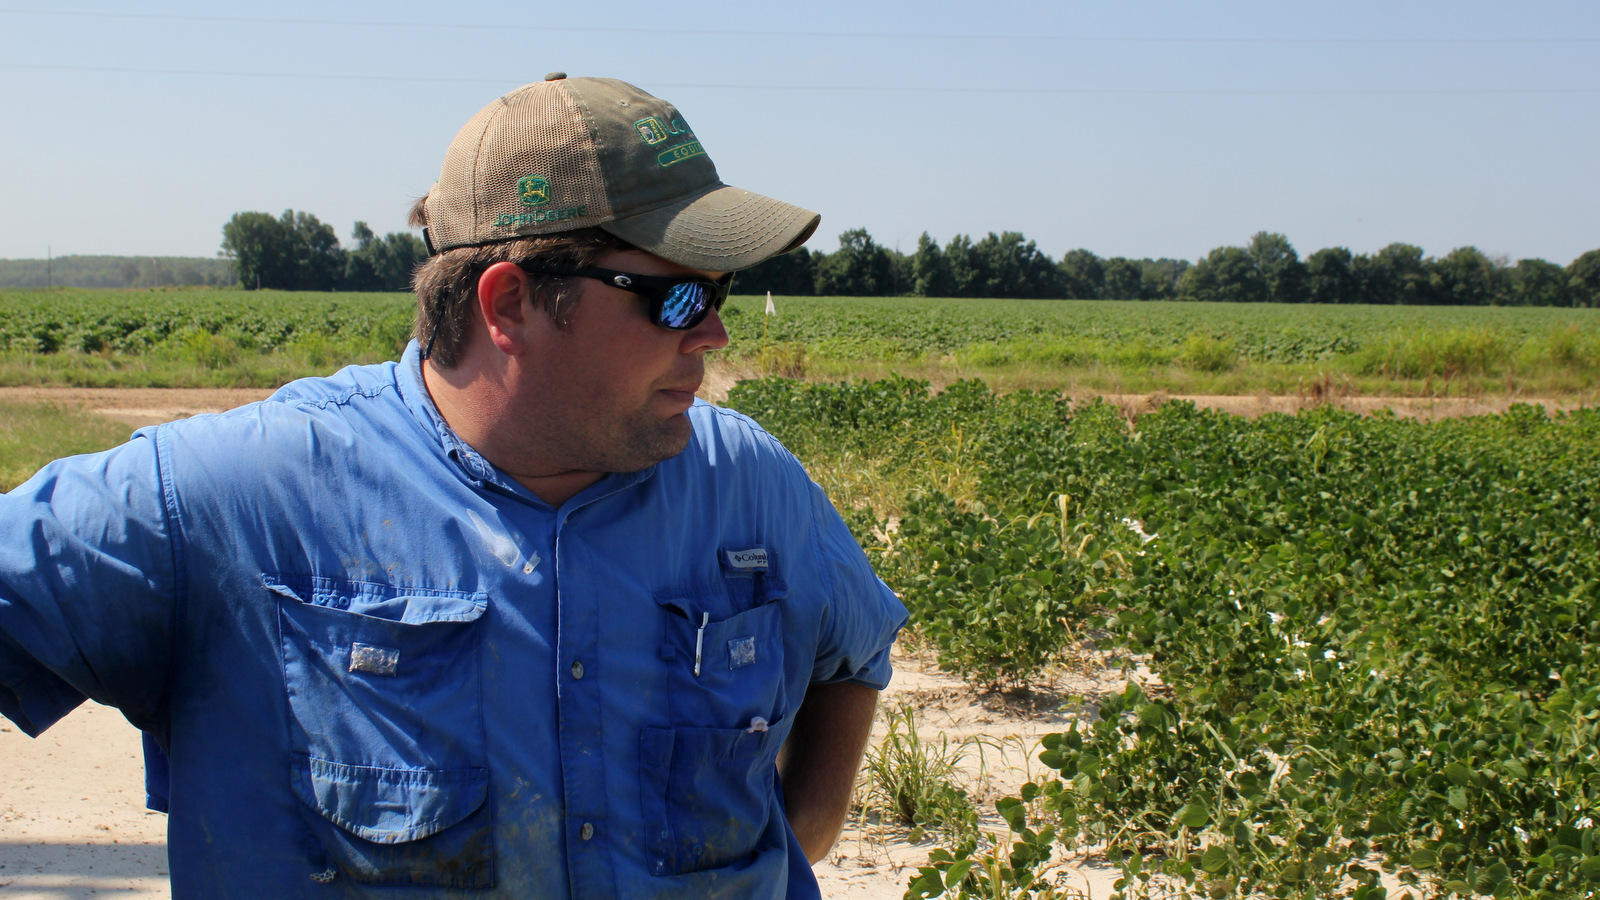 East Arkansas soybean farmer Reed Storey looks at his field in Marvell, Ark. Storey said half of his soybean crop has shown damage from dicamba, an herbicide that has drifted onto unprotected fields and spawned hundreds of complaints from farmers. (AP/Andrew DeMillo)